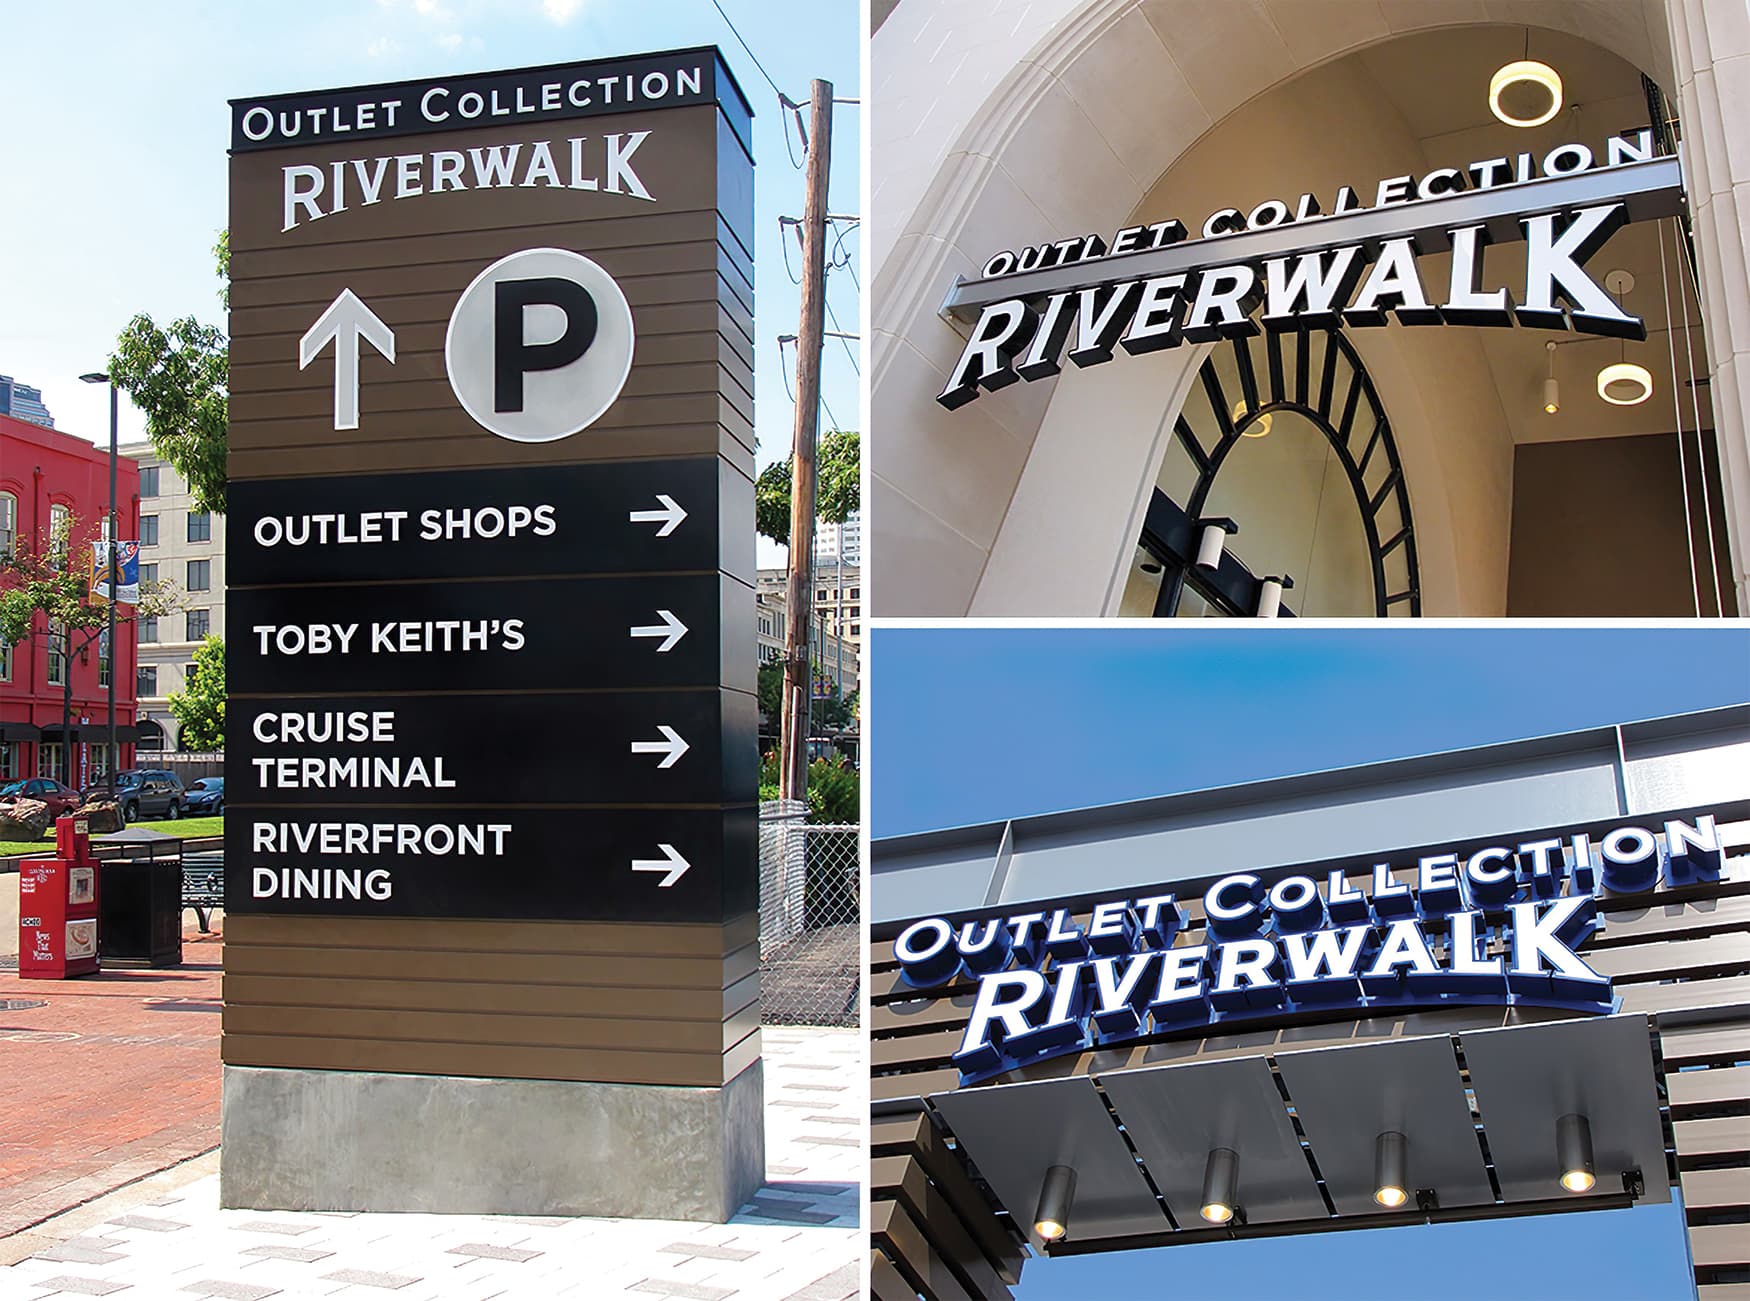 The Outlet Collection at Riverwalk. Identity Signage. Project Signage. Wayfinding Signage.